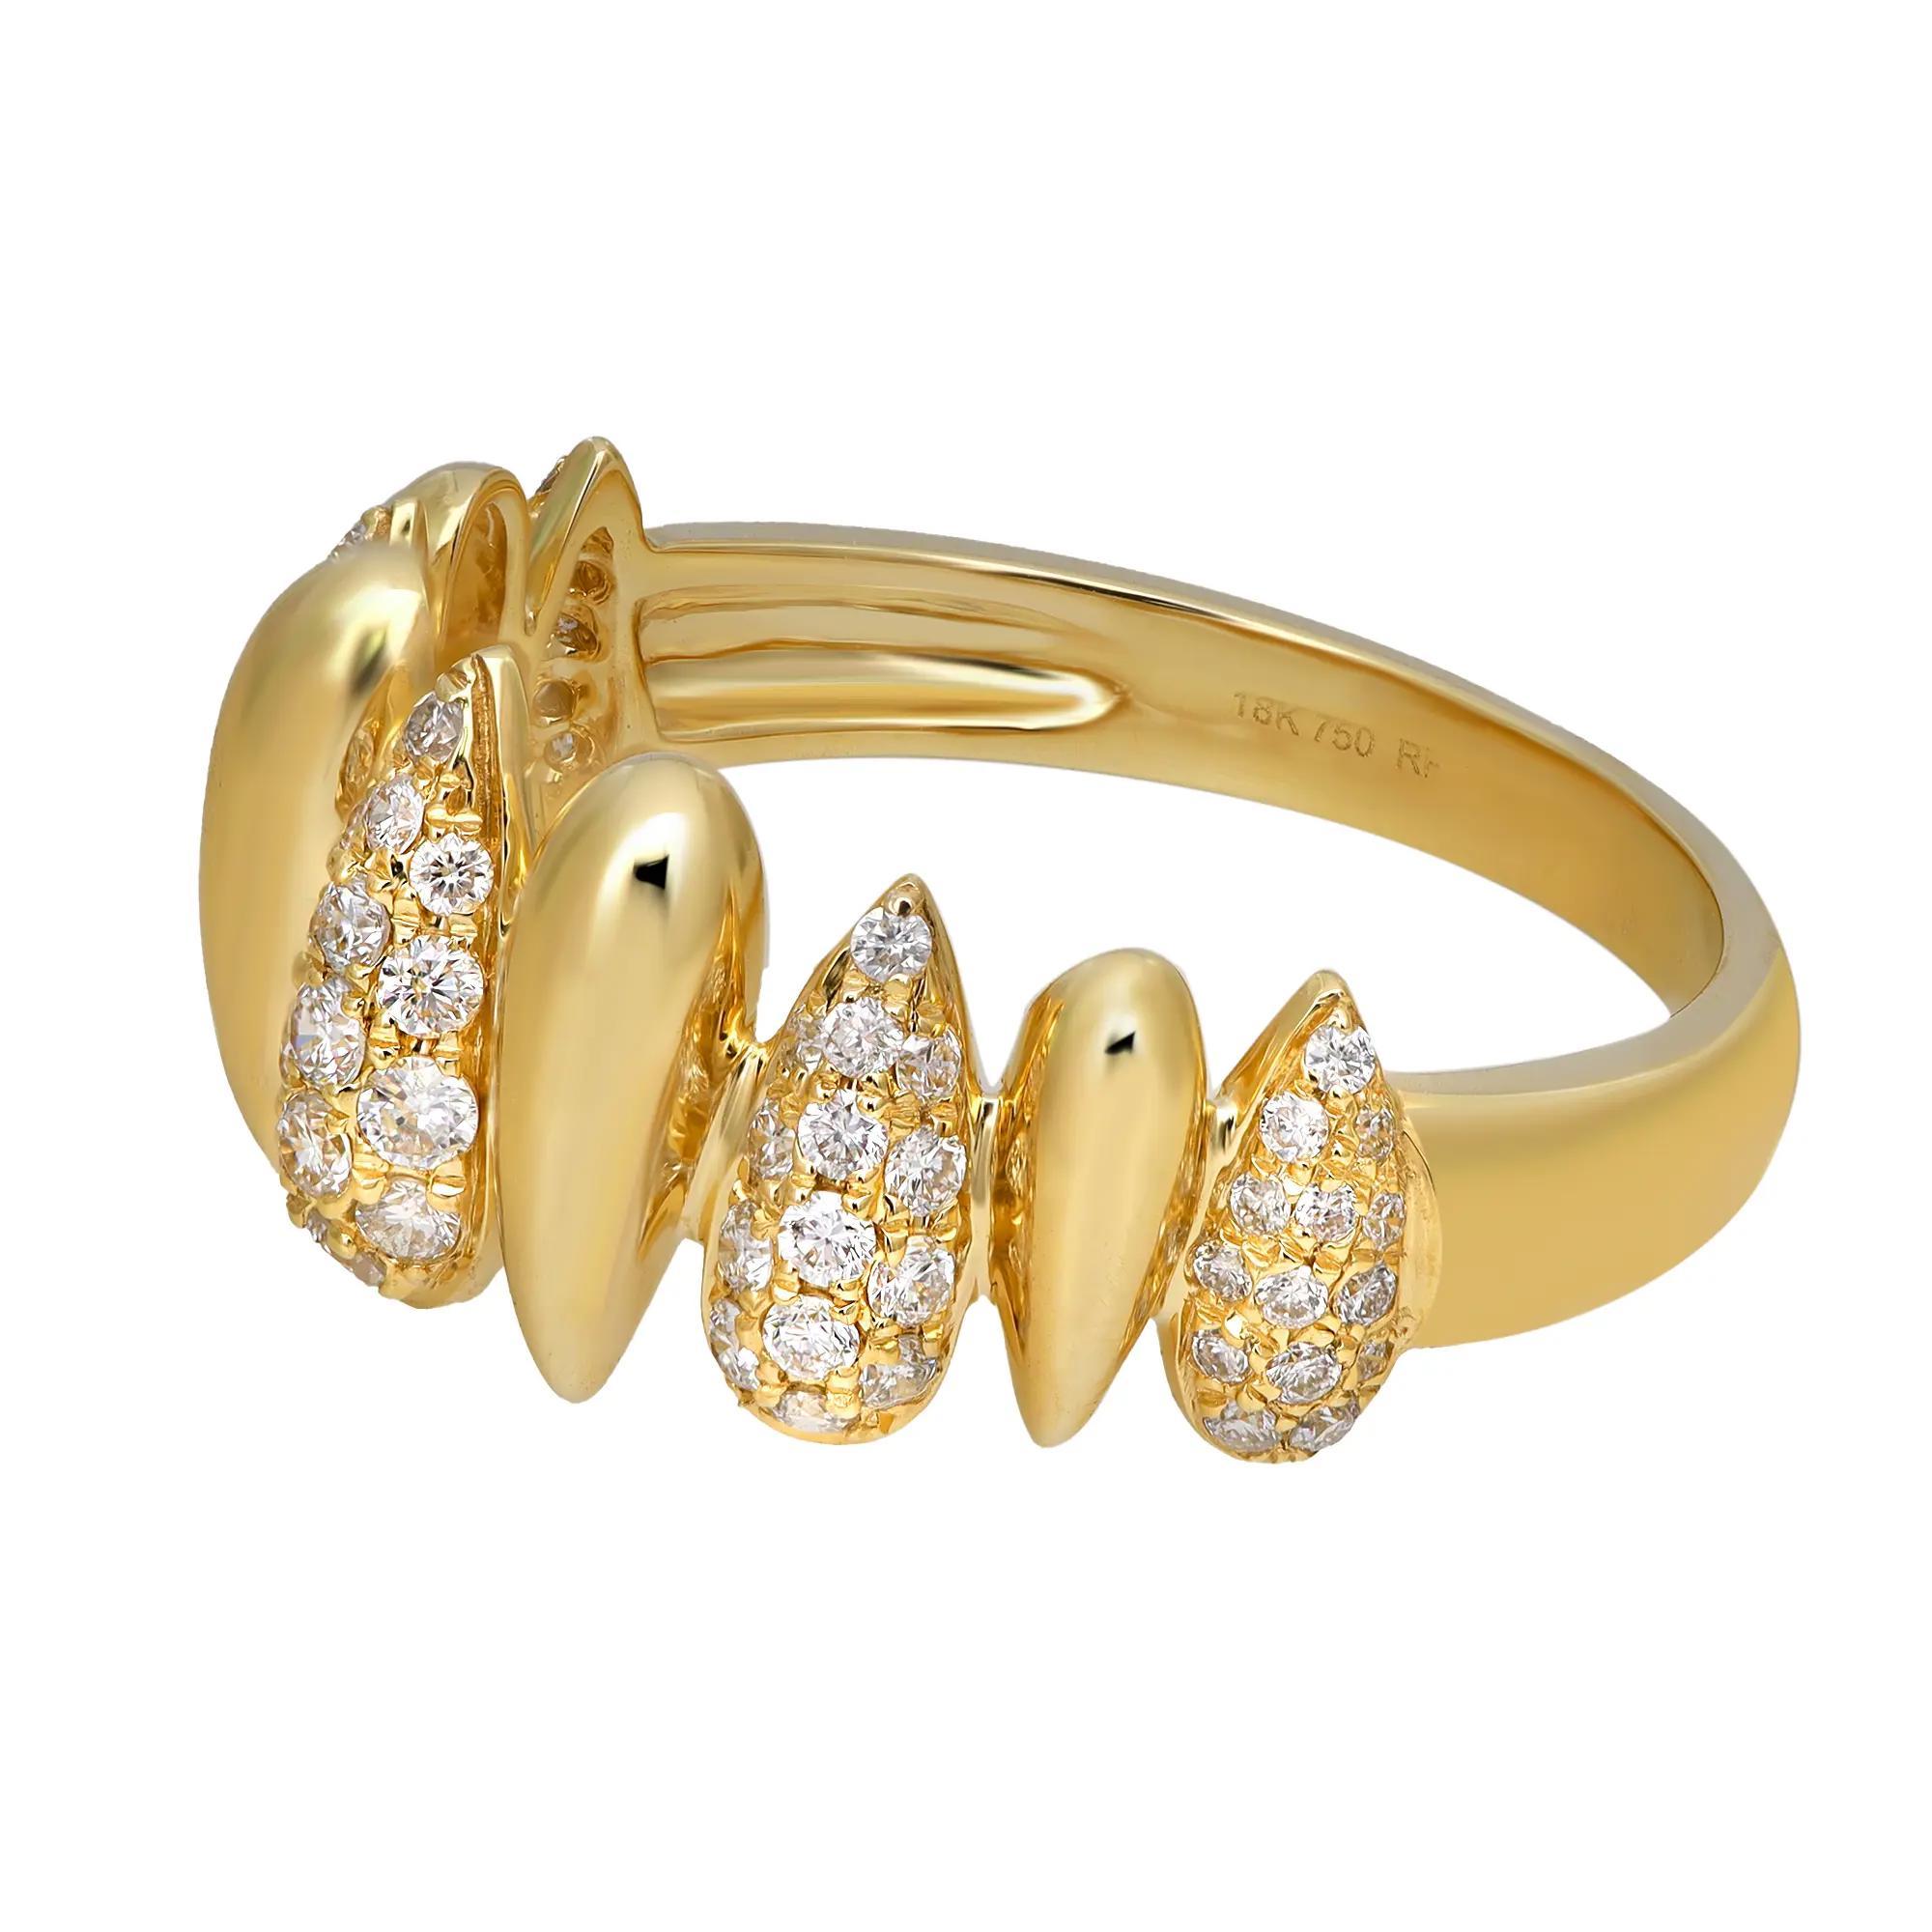 Round Cut Pave Set Round Diamond Multi Drop Shape Band Ring 18K Yellow Gold 0.43Ctw SZ 6.5 For Sale